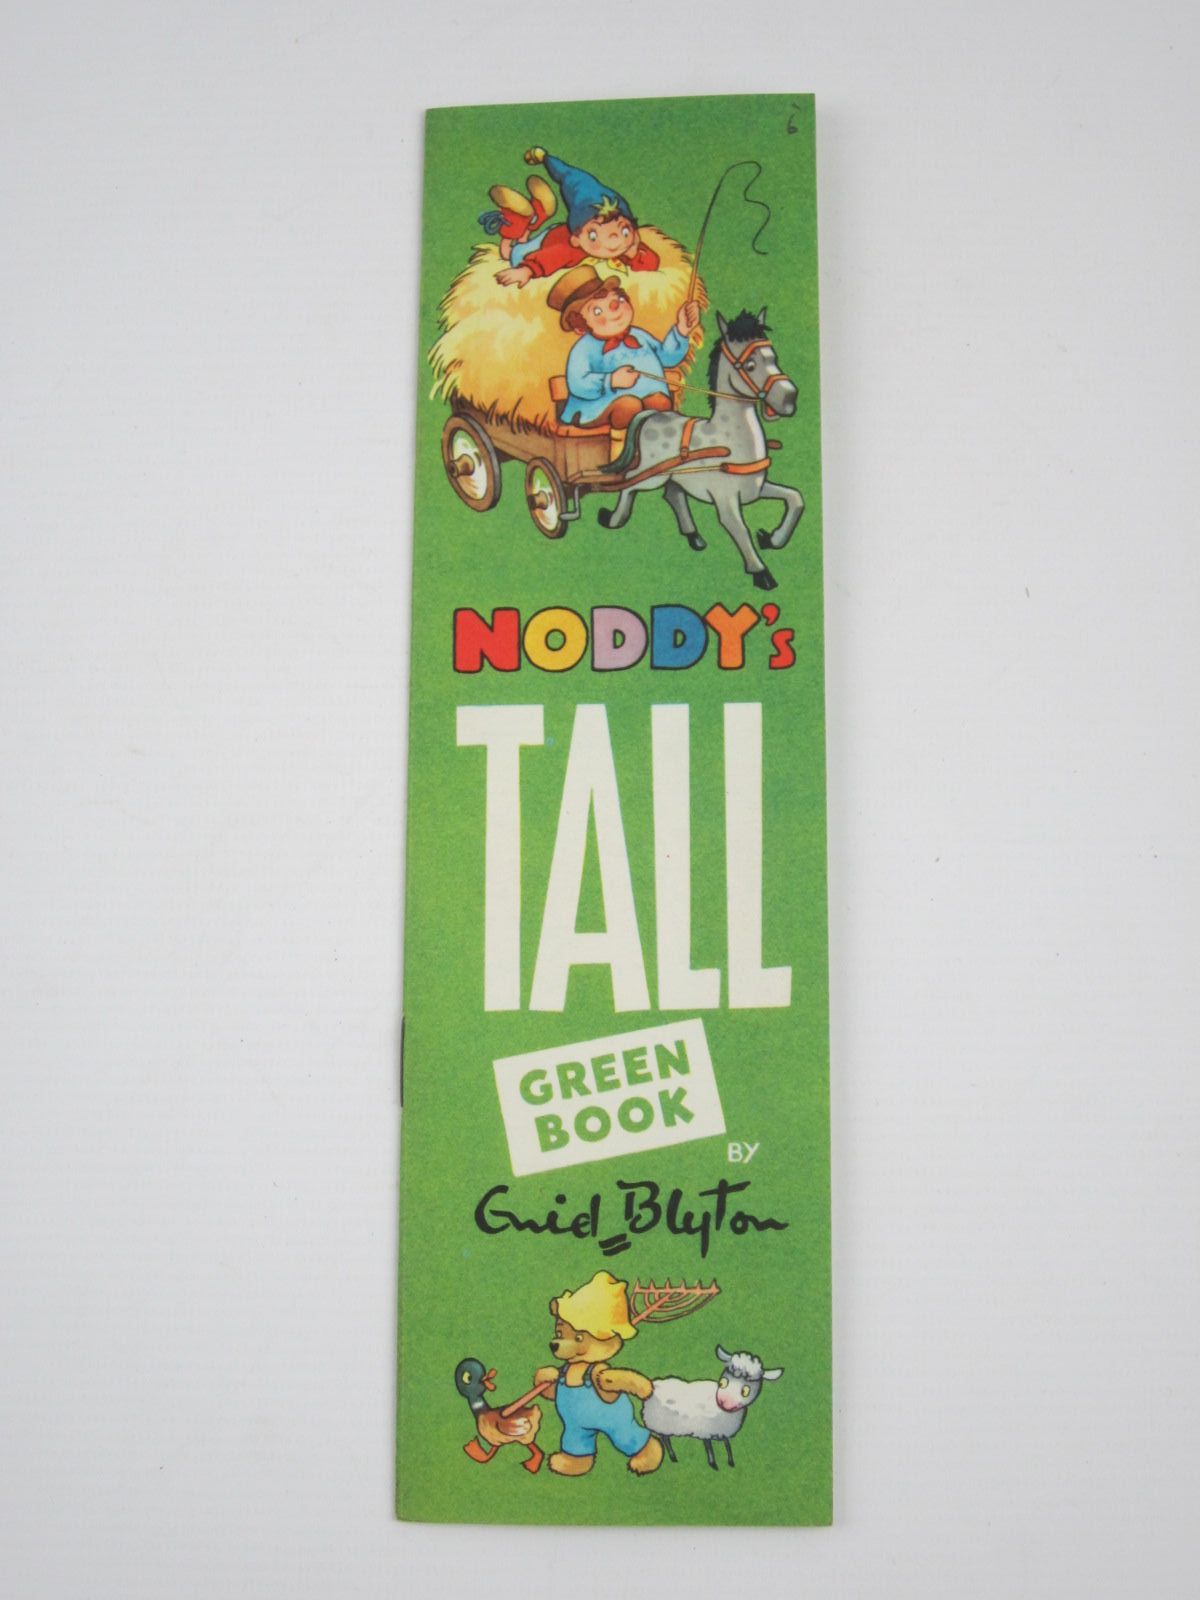 Cover of NODDY'S TALL GREEN BOOK by Enid Blyton